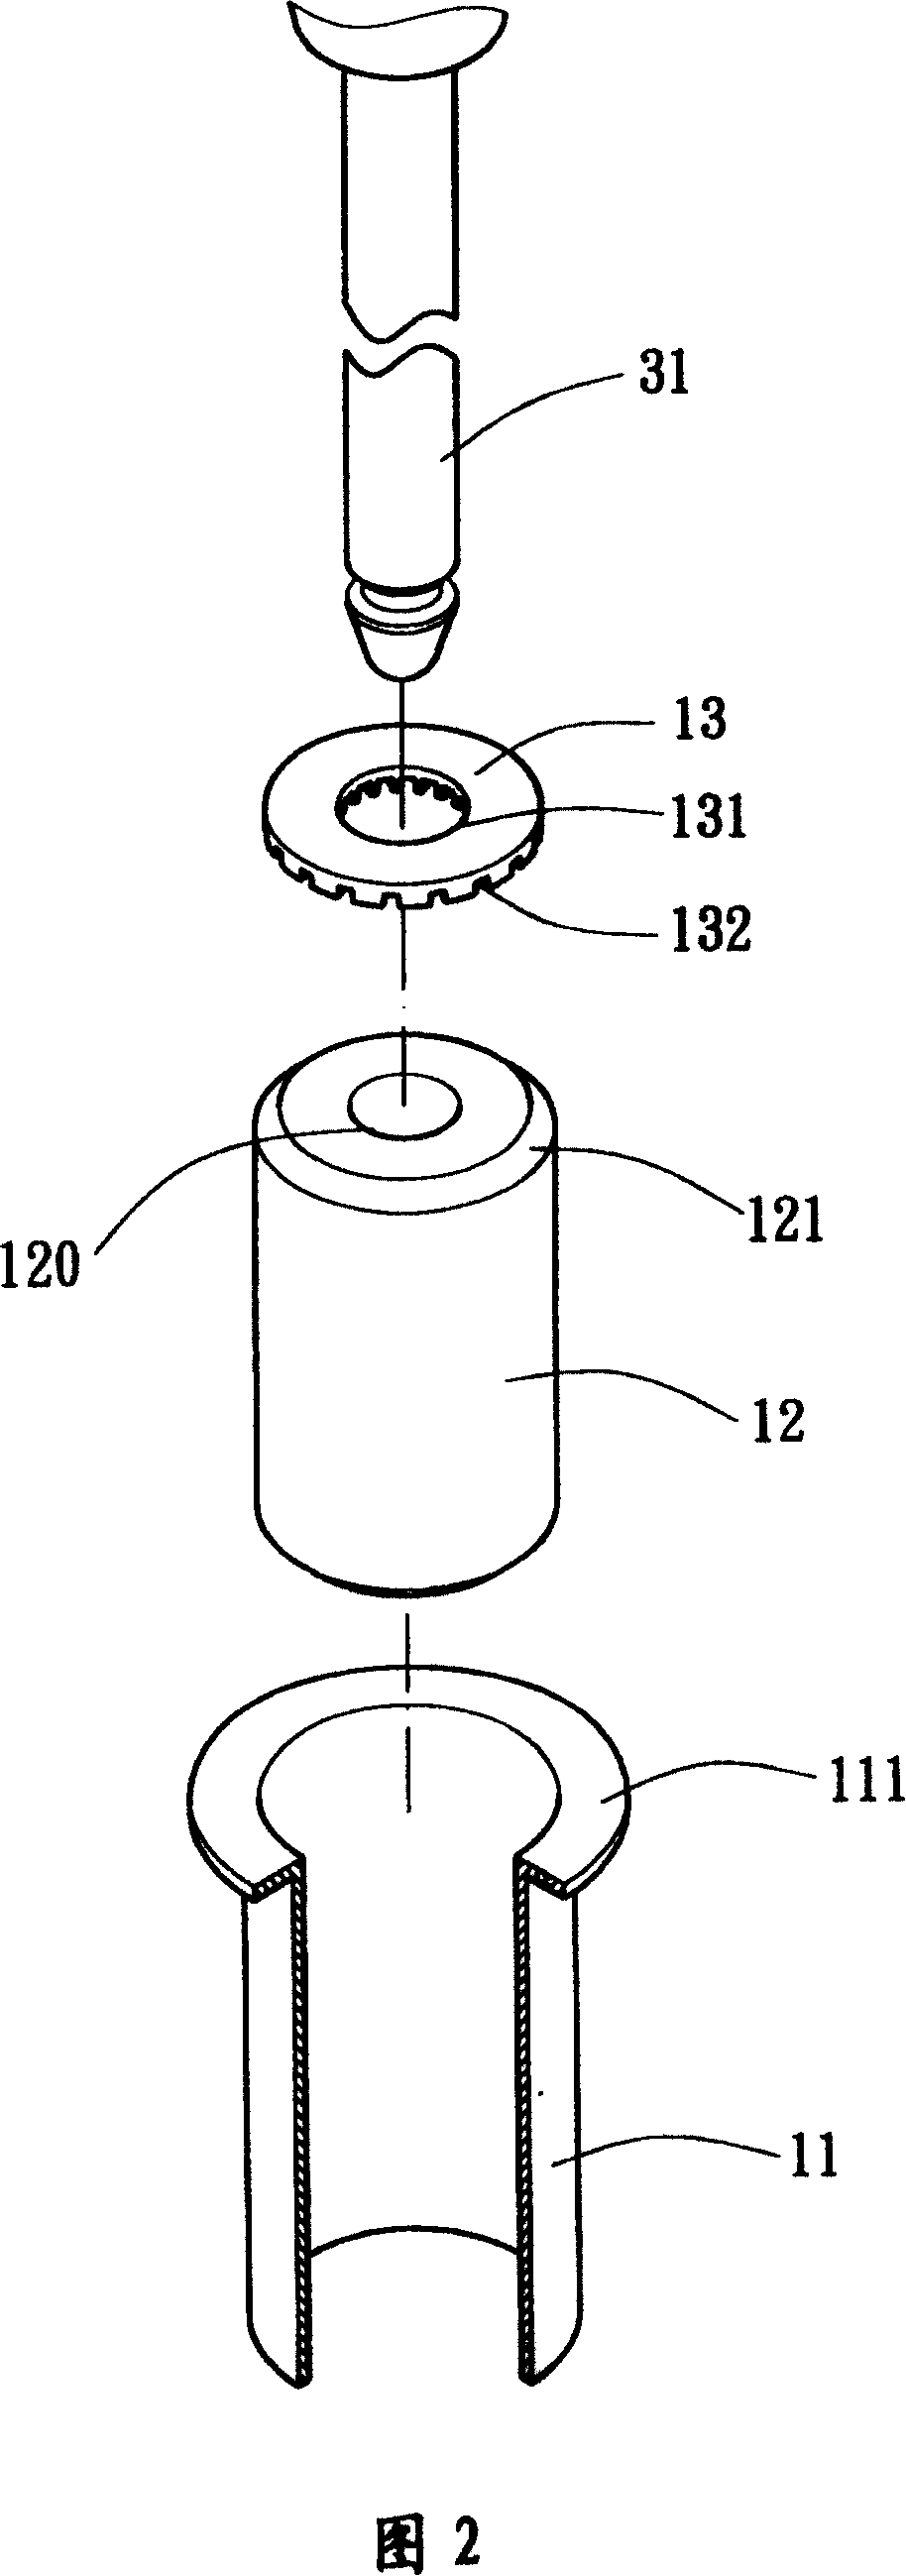 Motor dust proof bearing assembly